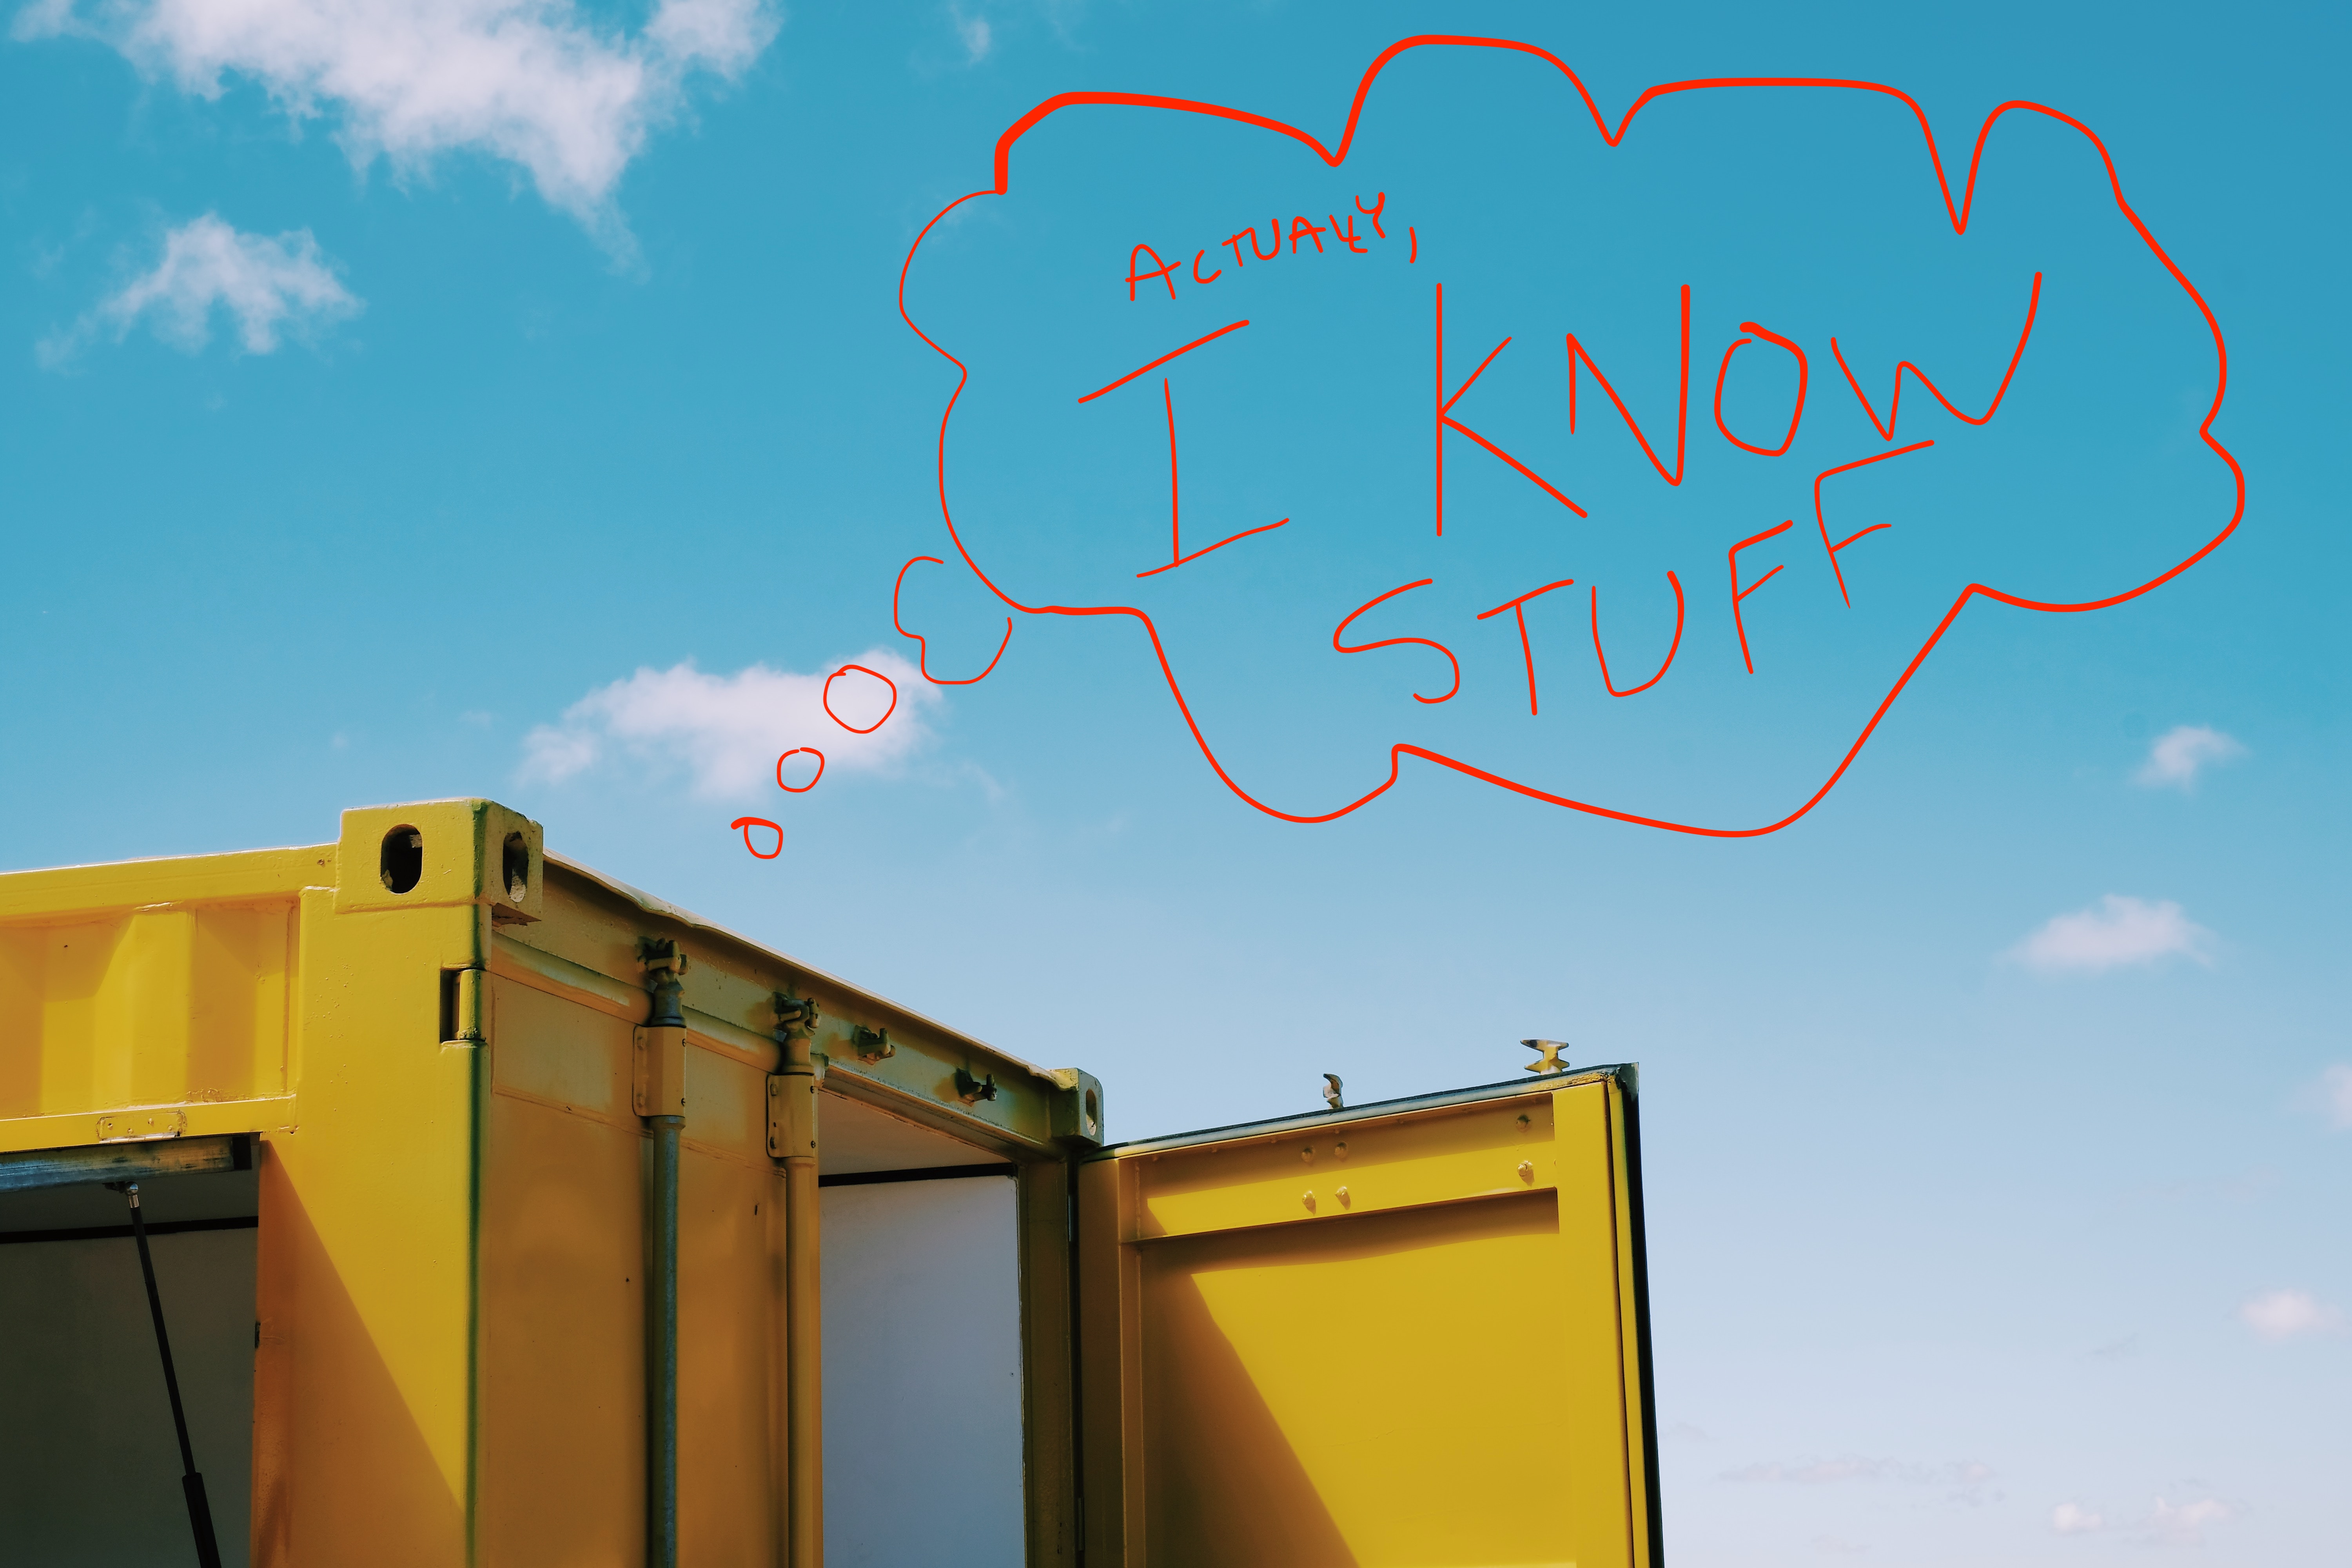 Yellow shipping container
with a red hand-written speech bubble:
actually, I know stuff
